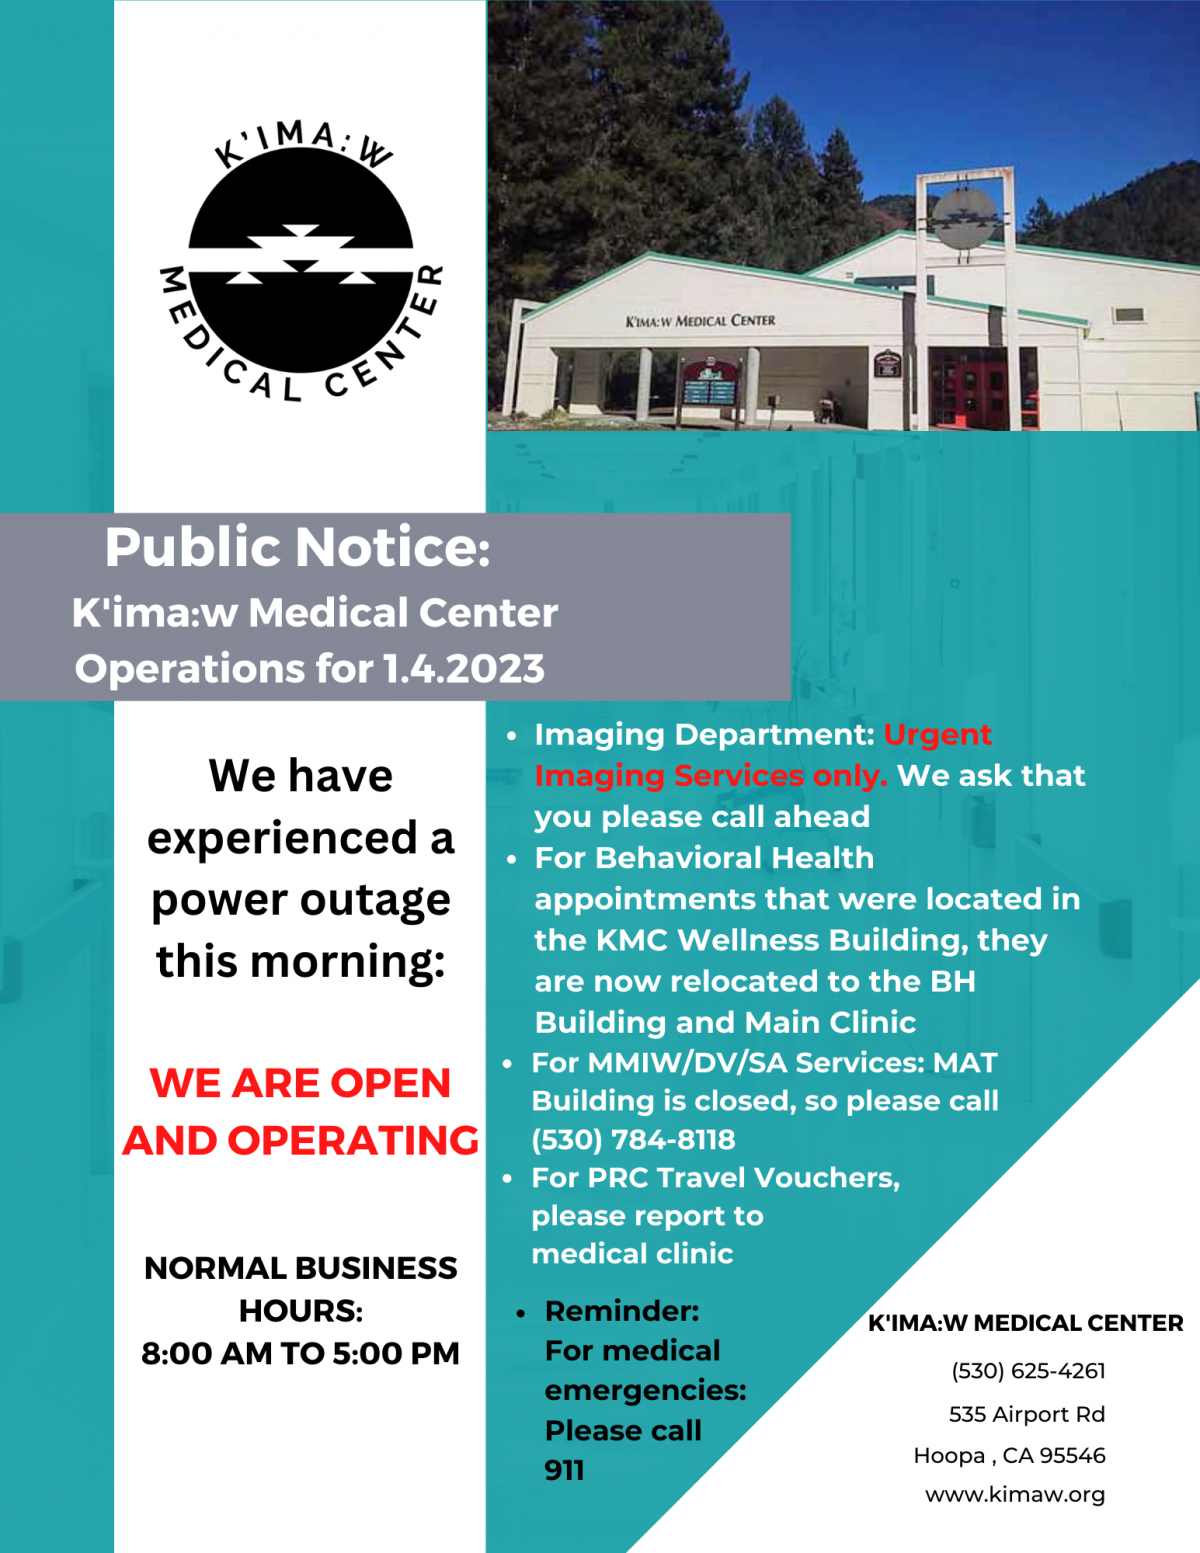 KMC Power Outage for 1.4.2023